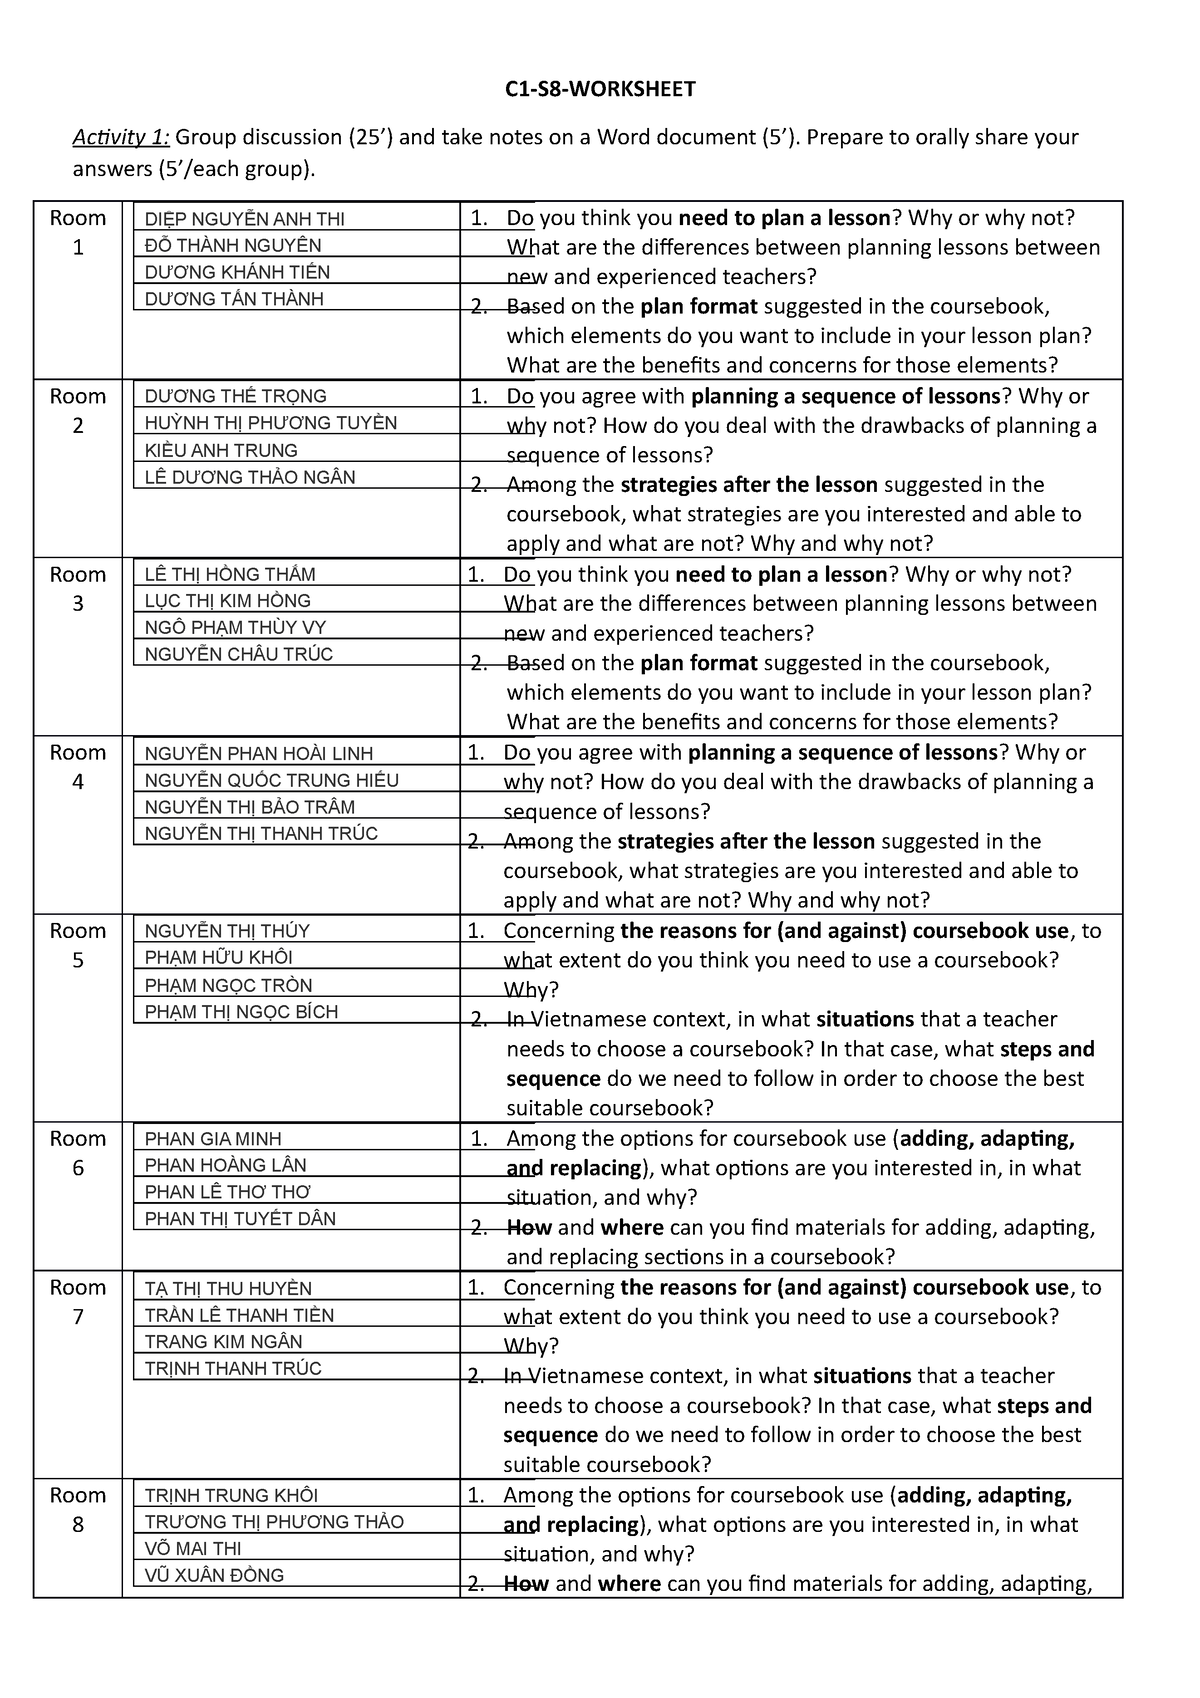 class-1-week-8-worksheet-c1-s8-worksheet-activity-1-group-discussion